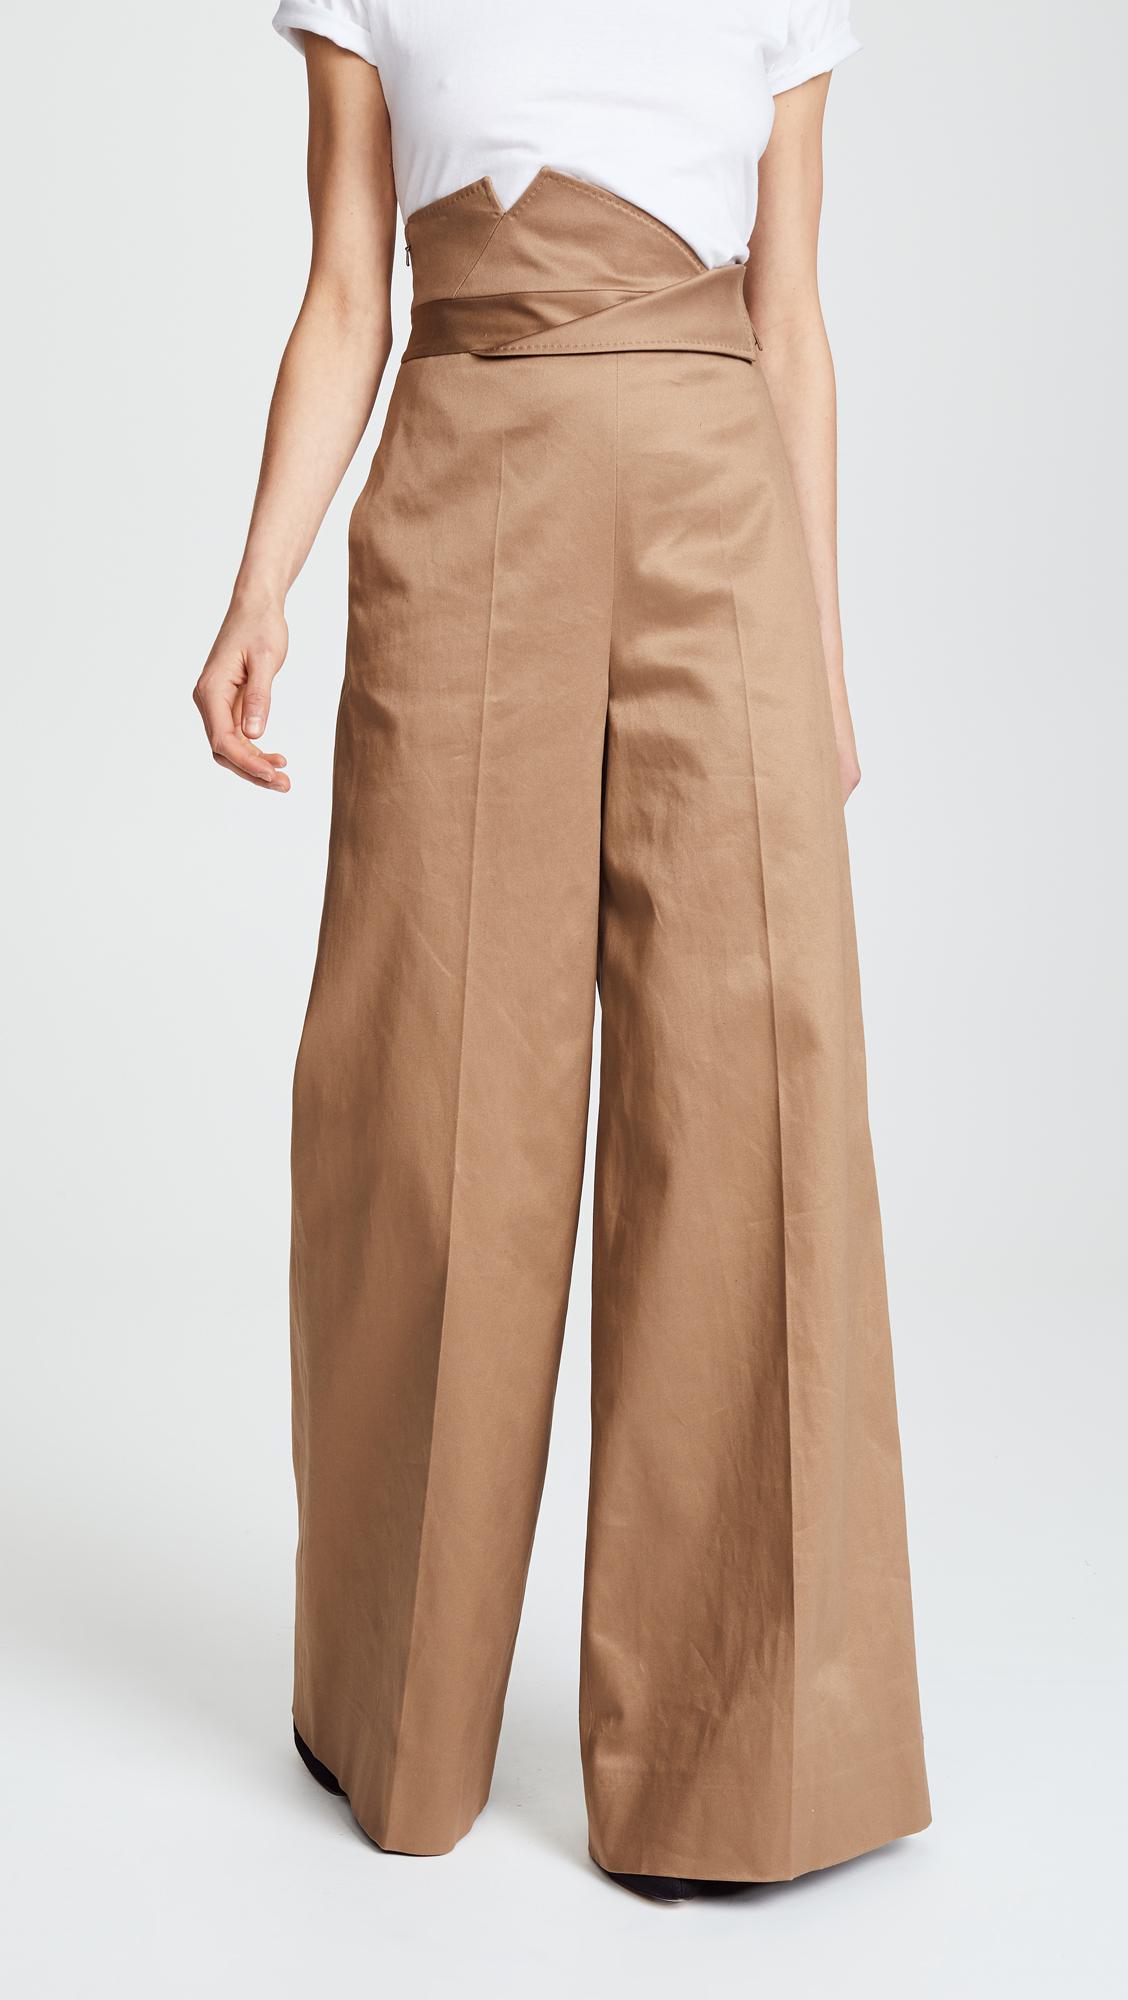 Monse Cotton High Waisted Wide Leg Trousers in Natural - Lyst